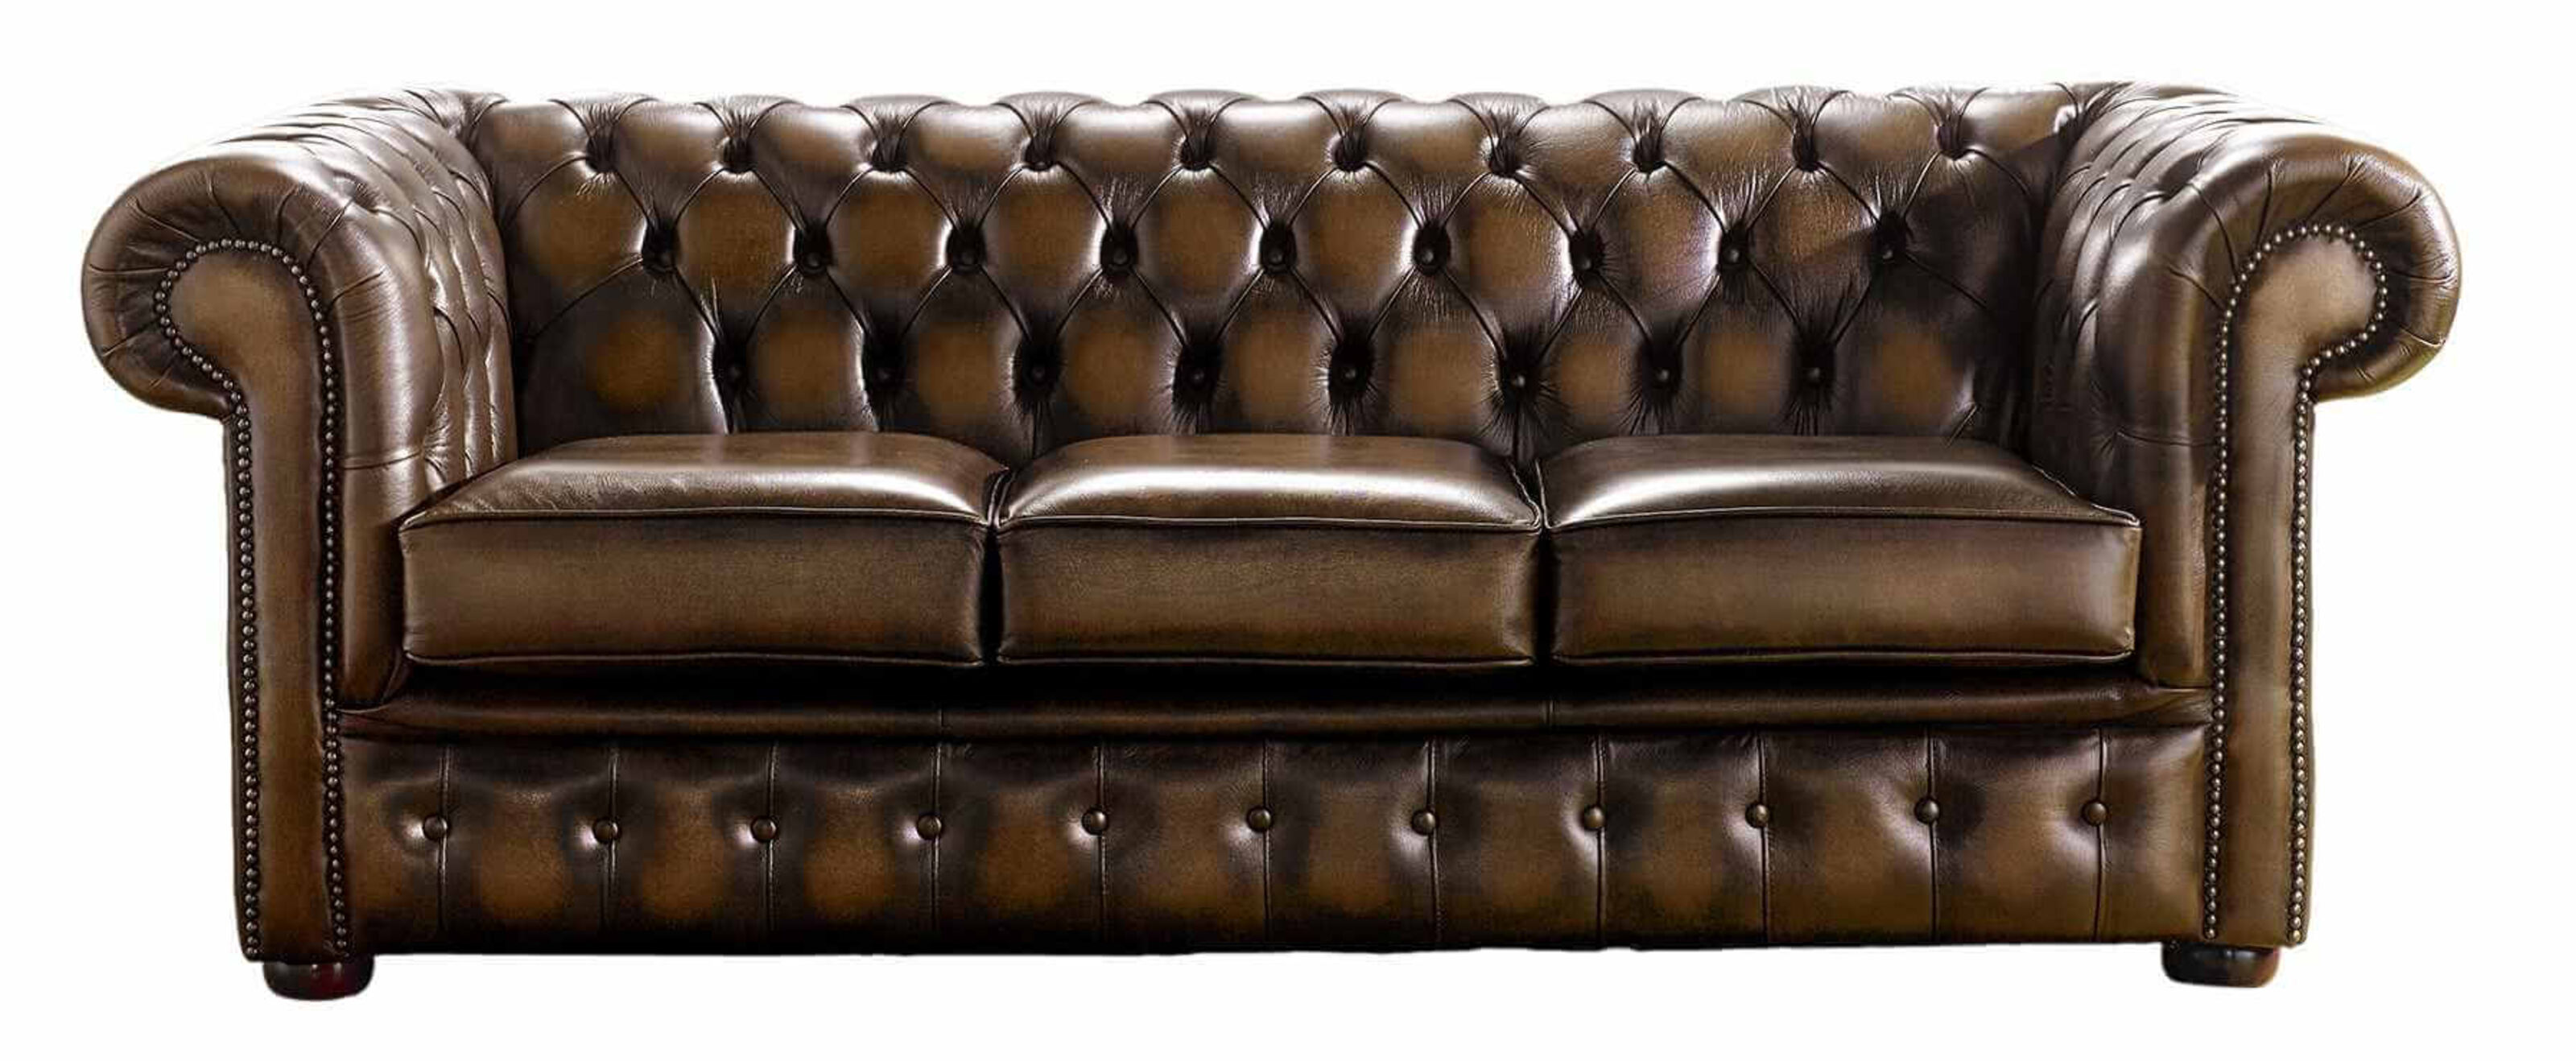 10 Years of Quality Leather Furniture Cleaning